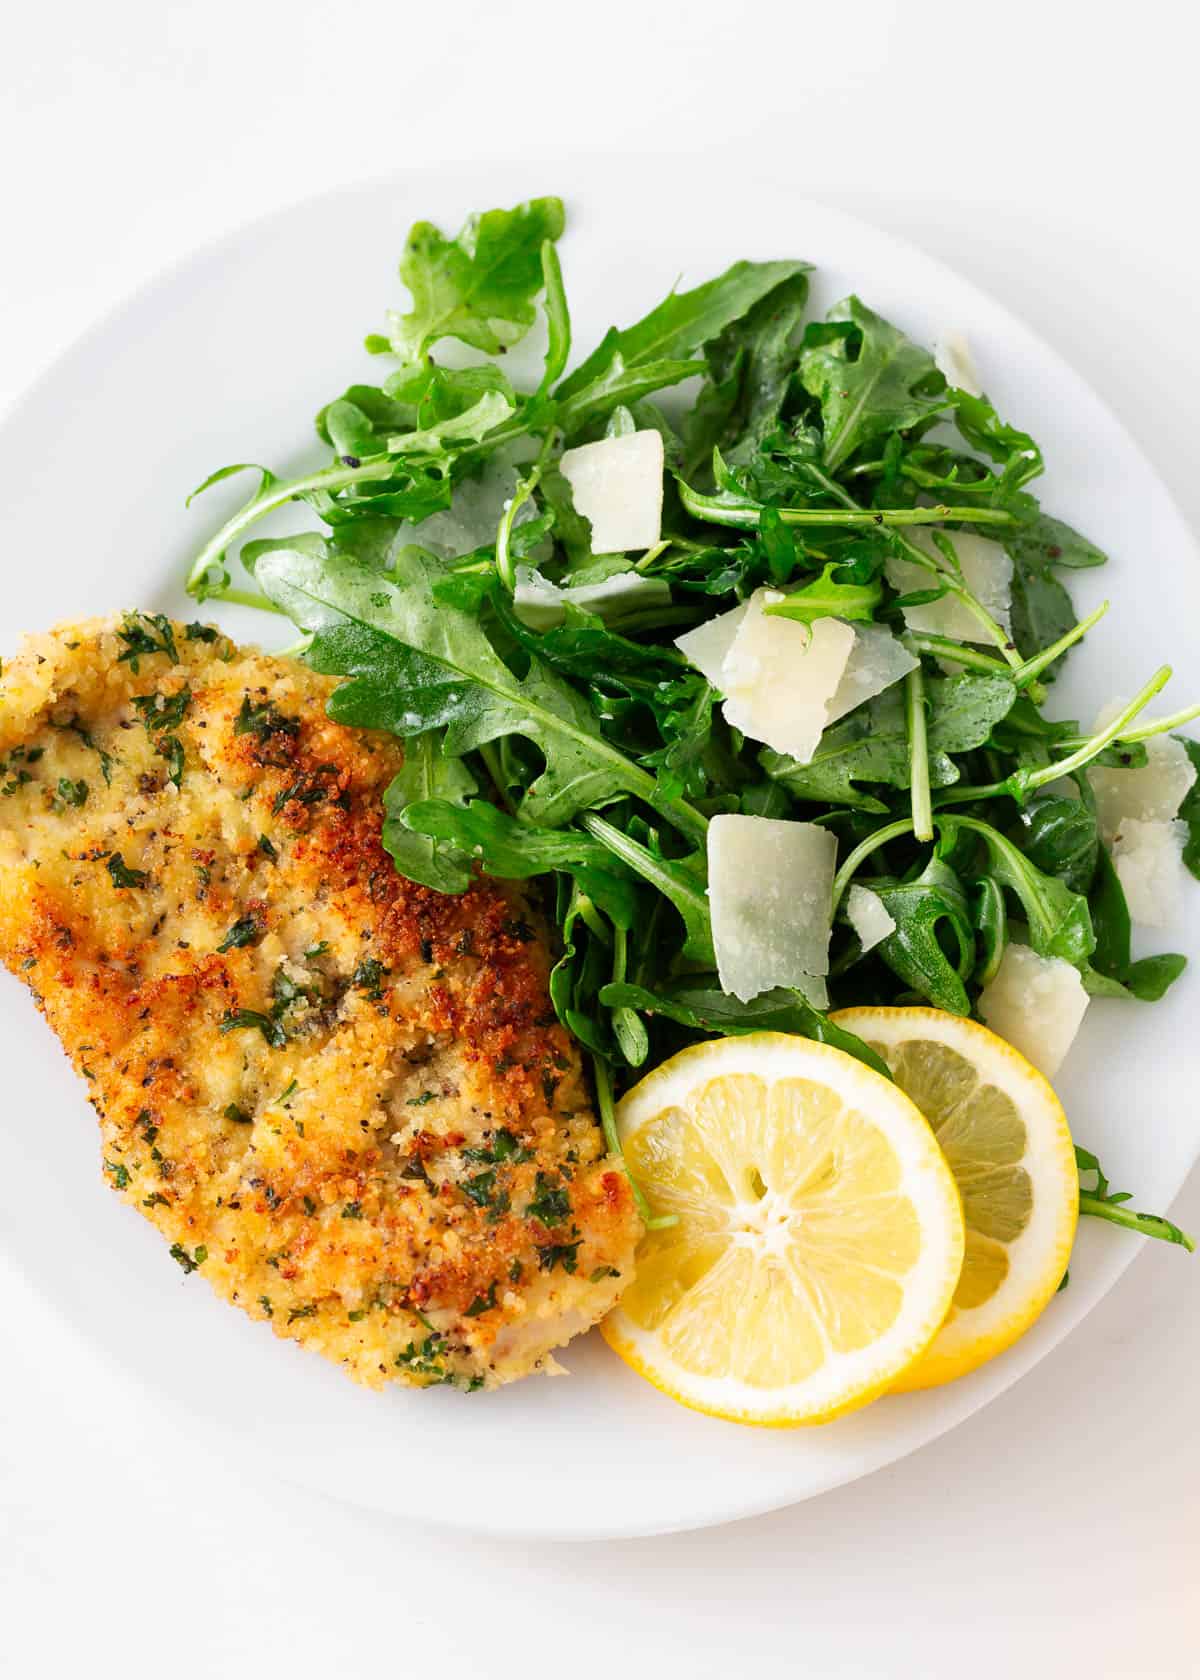 Chicken milanese on a white plate with arugula salad.